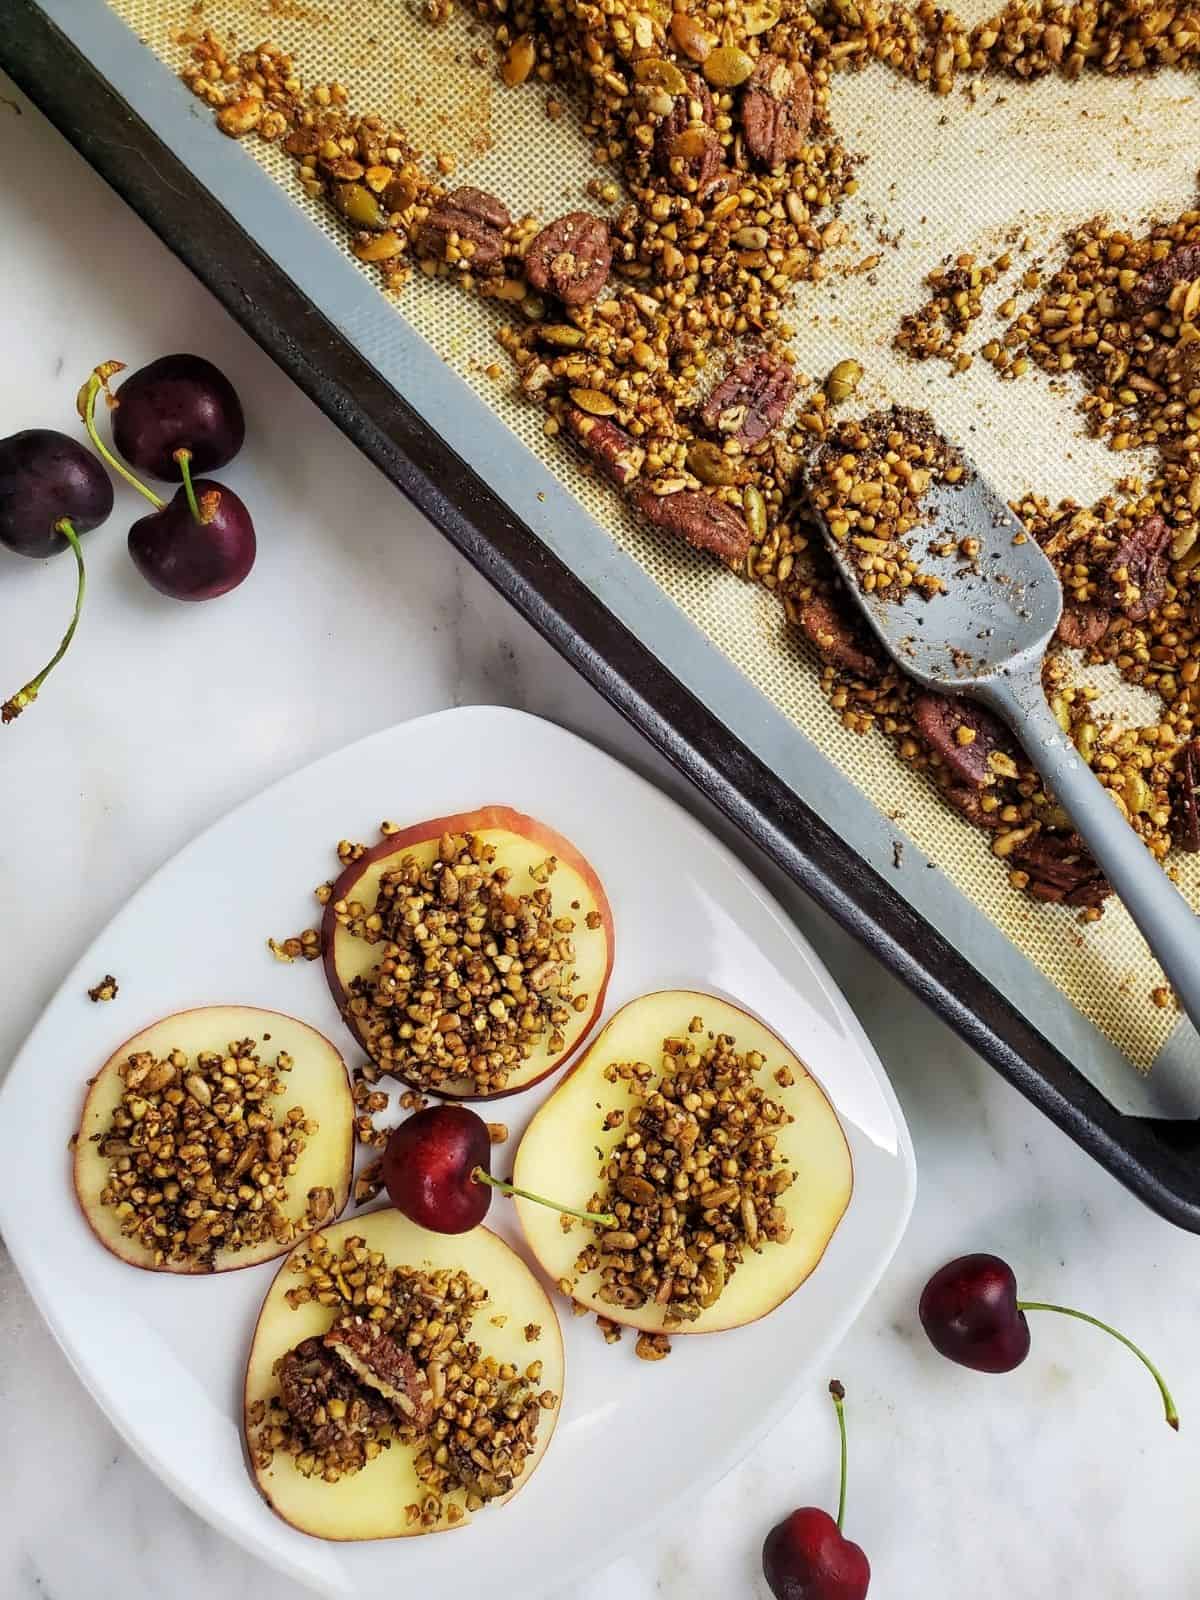 Slices of apples topped with granola nuts next to cherries.